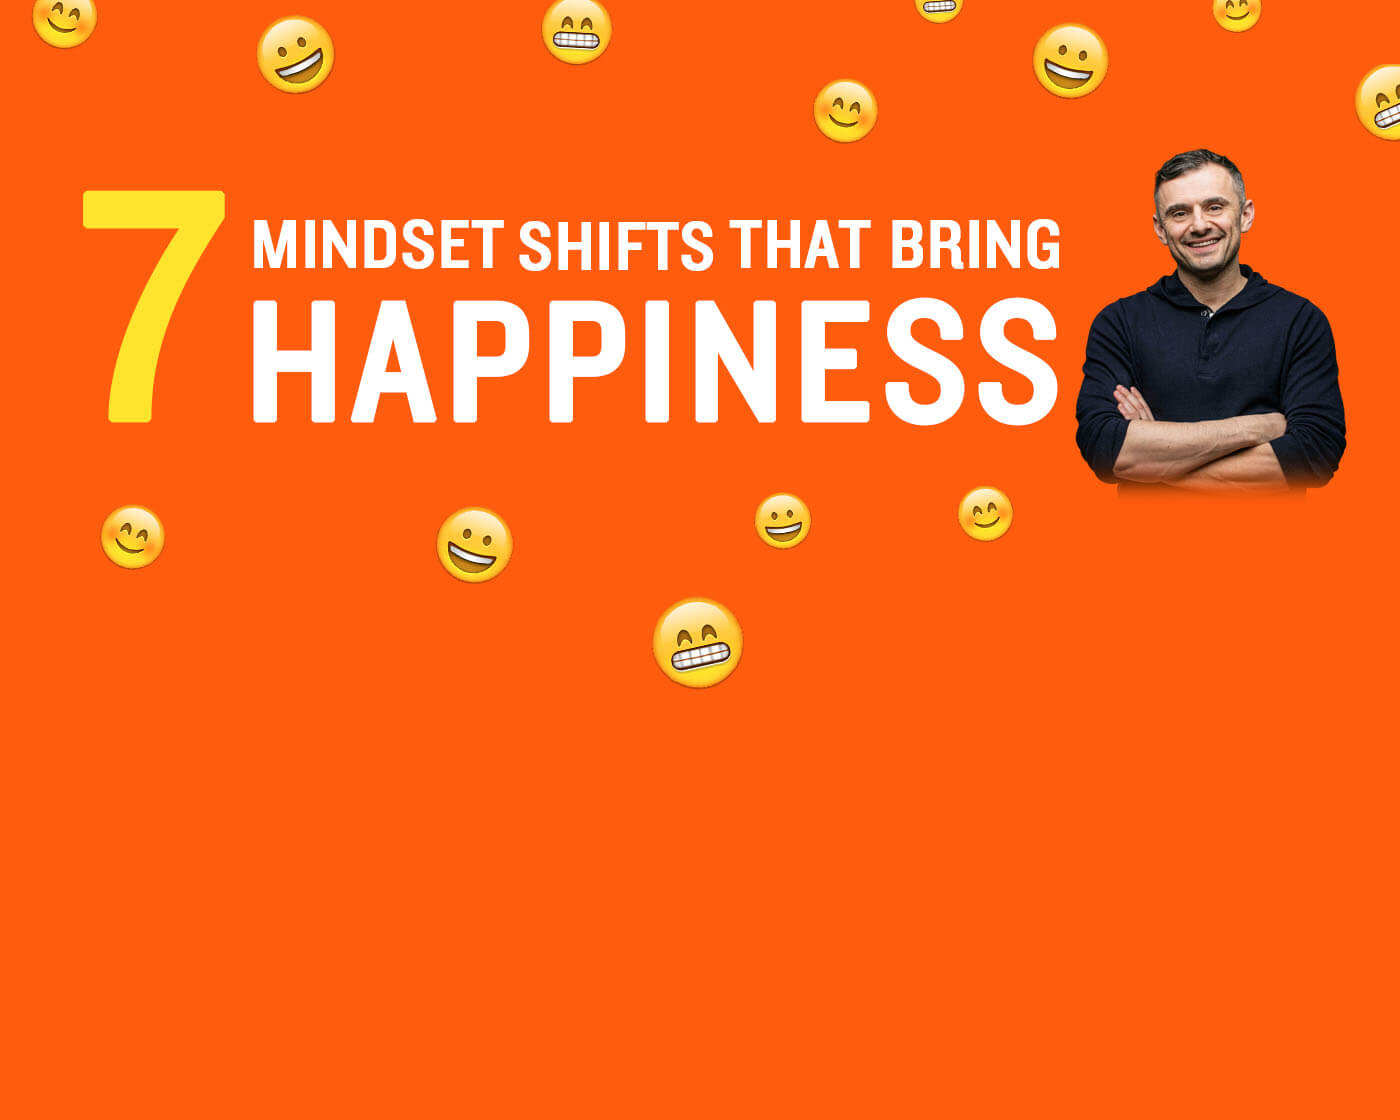 7 Mindset Shifts That Bring Happiness